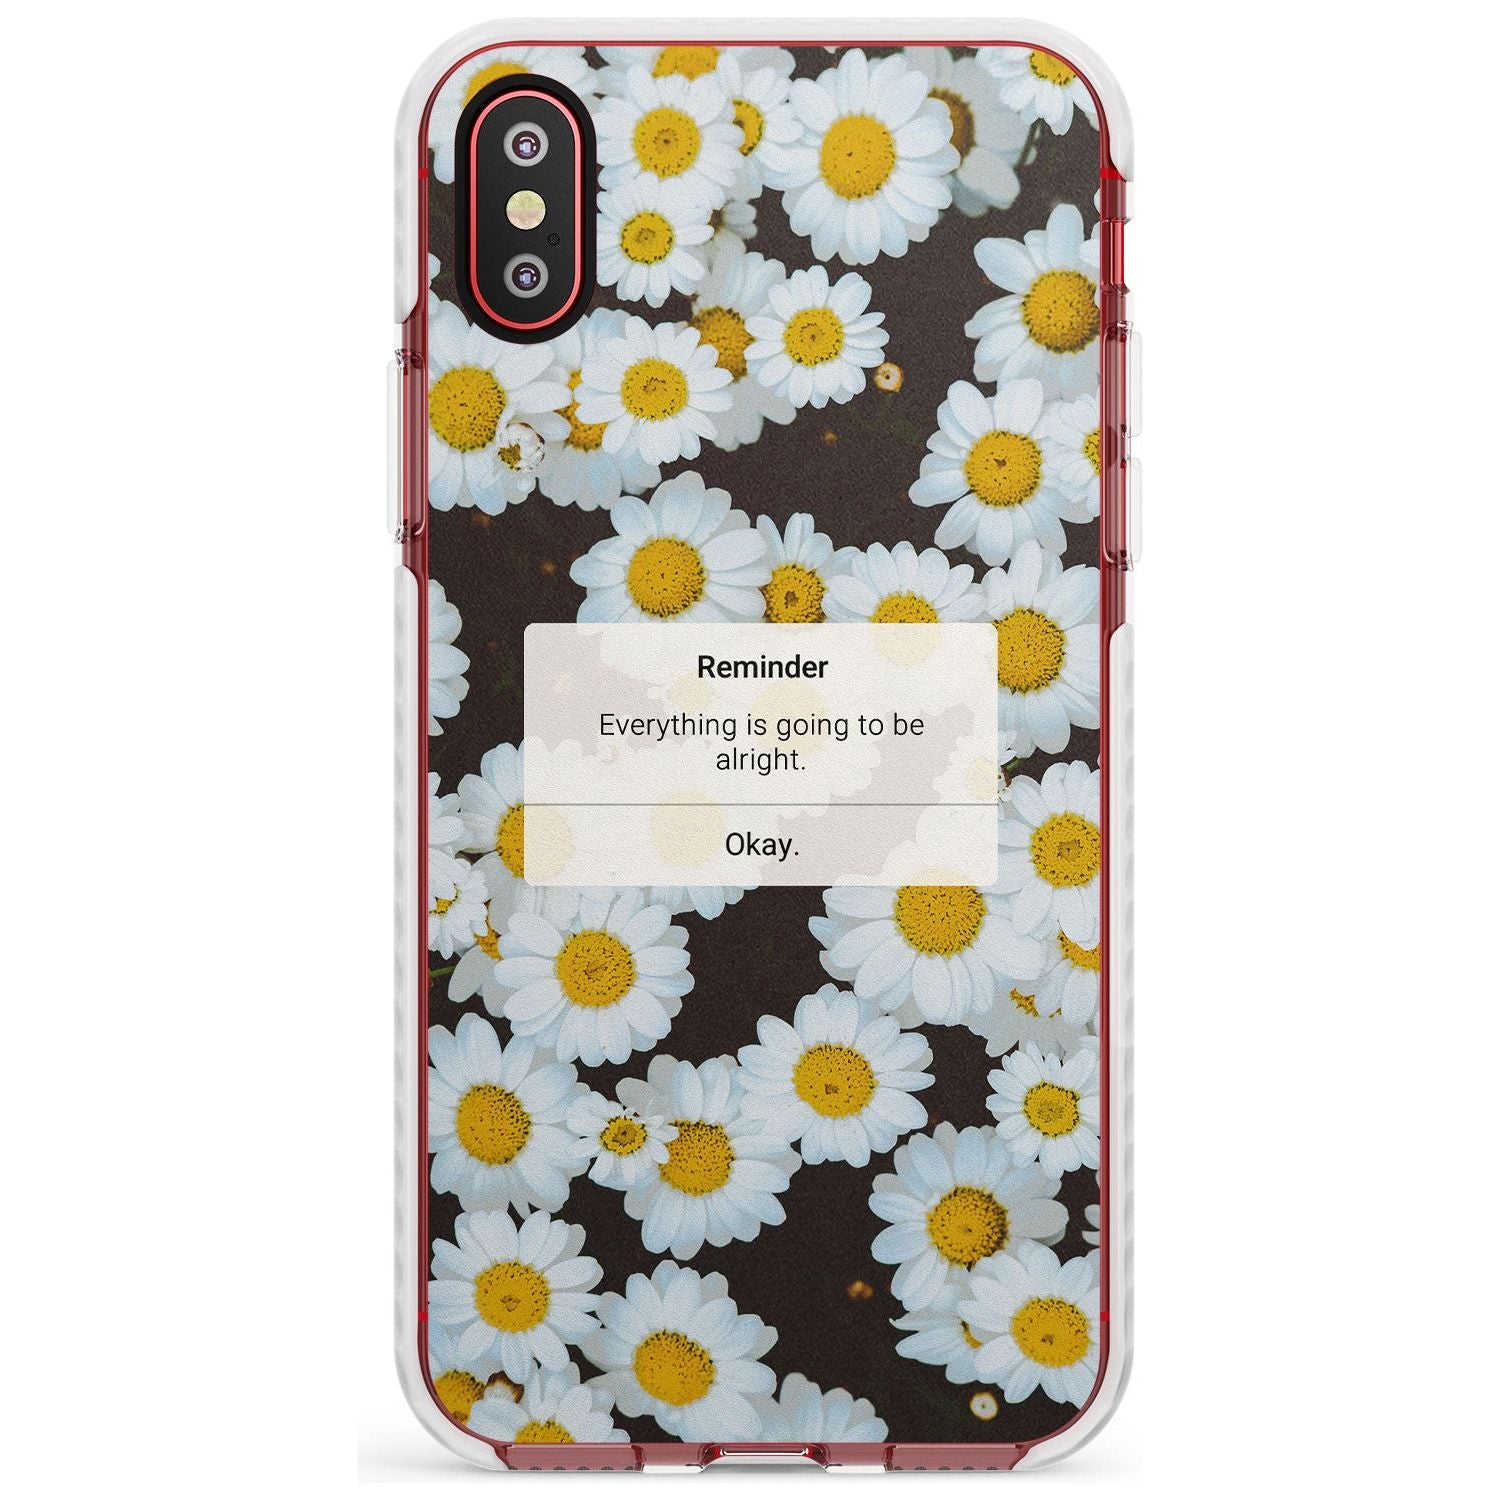 "Everything will be alright" iPhone Reminder Slim TPU Phone Case Warehouse X XS Max XR